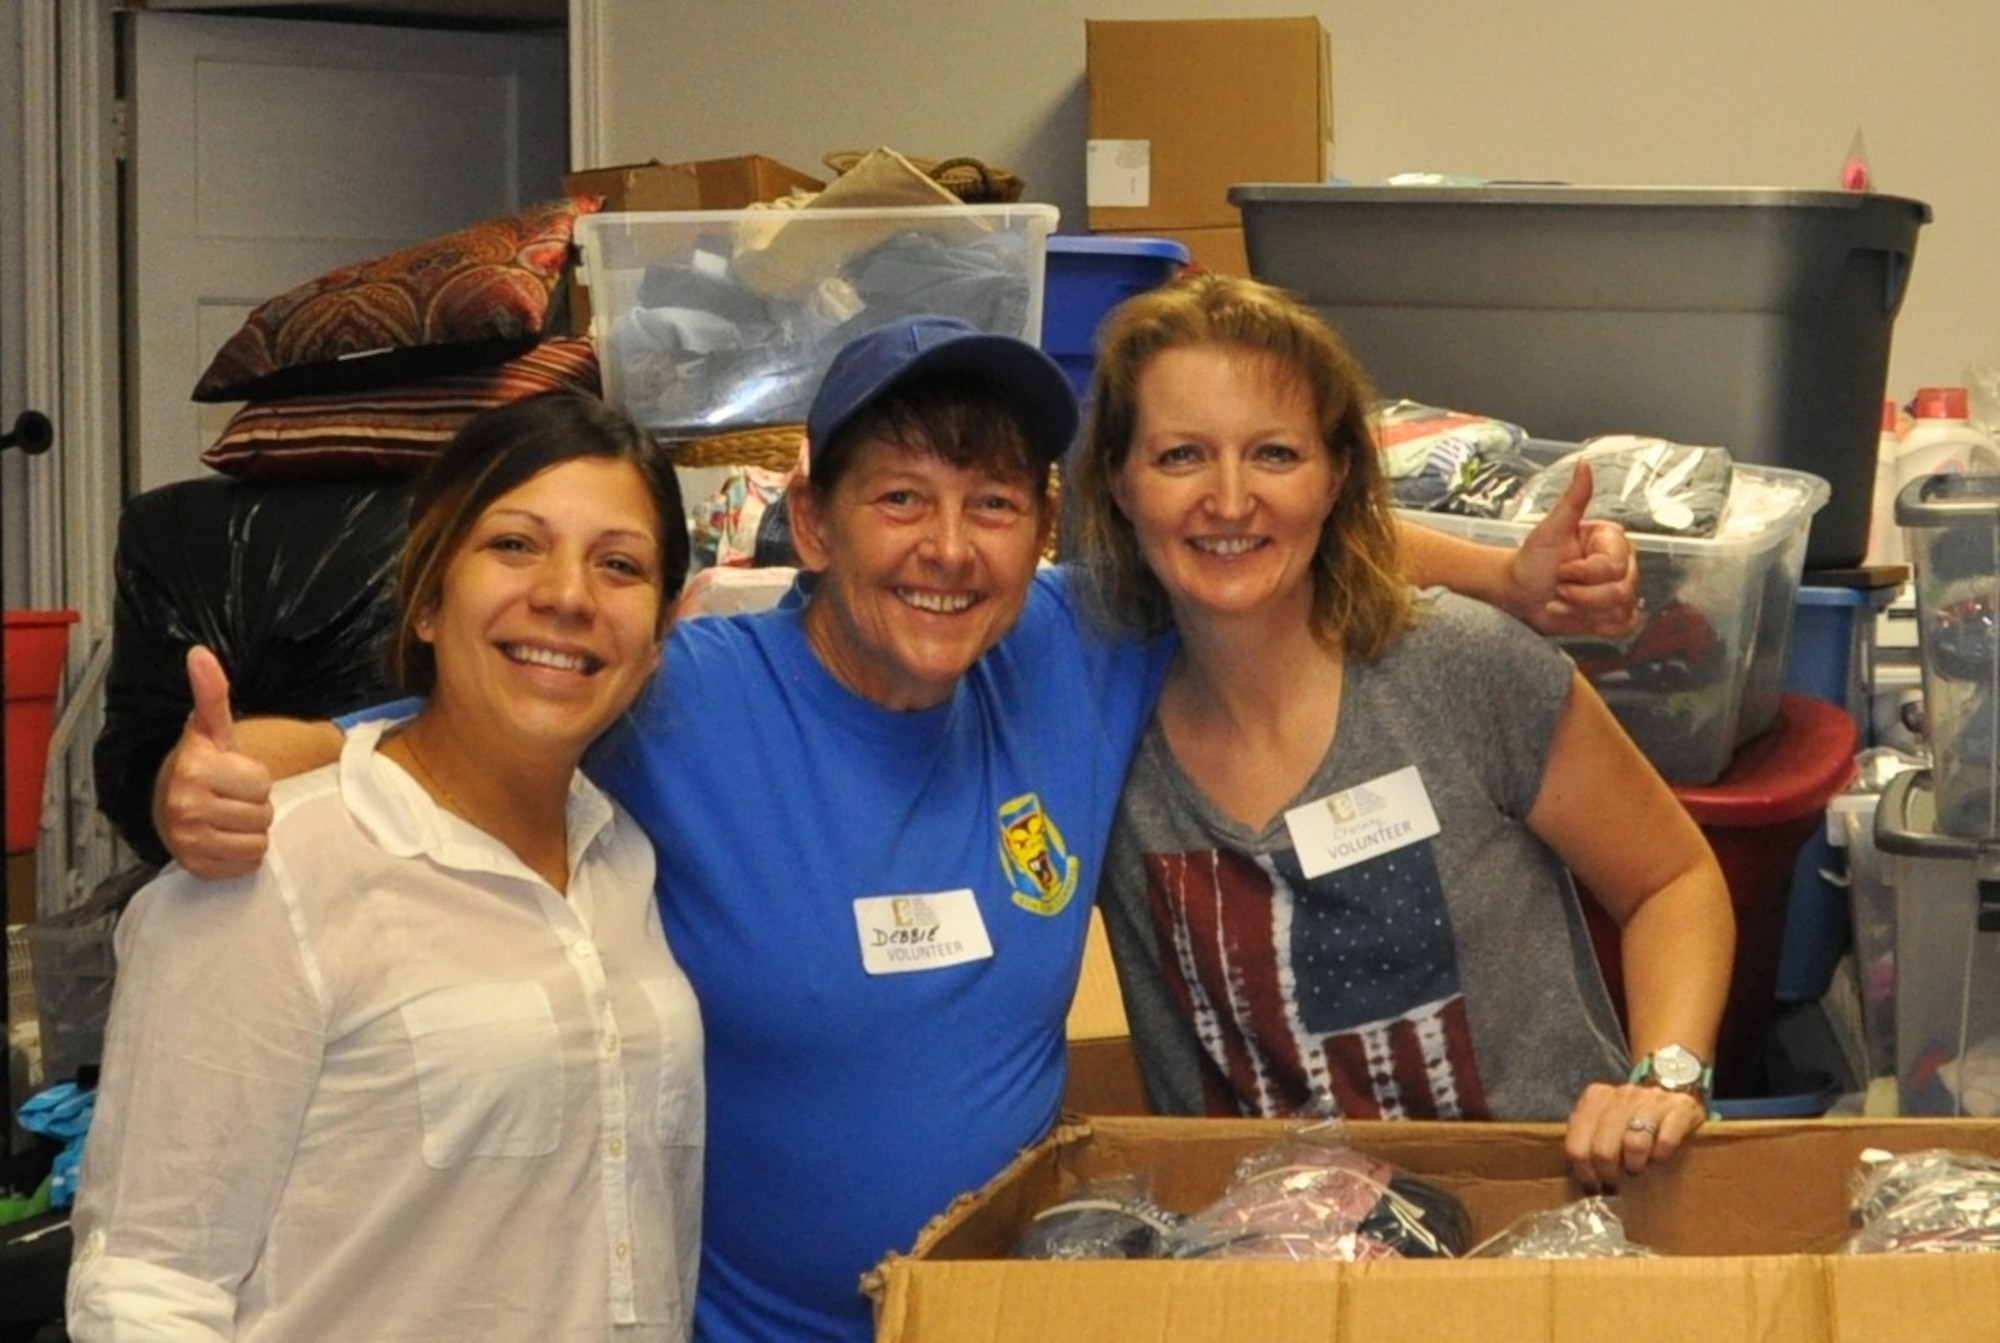 Chastity Ramirez  (right) and Debbie Gildea (center) pose for a photo with Priscilla Mendoza, San Antonio, Texas Family Violence Prevention Services/Battered Women and Children’s Shelter’s Donation Center assistant (left), during the 340th Flying Training Group's  Sept. 11, 2020 community outreach event. Mendoza said the 16 boxes sorted and packed by 340th FTG members saved the center a week of work. (U.S. Air Force photo by Janis El Shabazz)